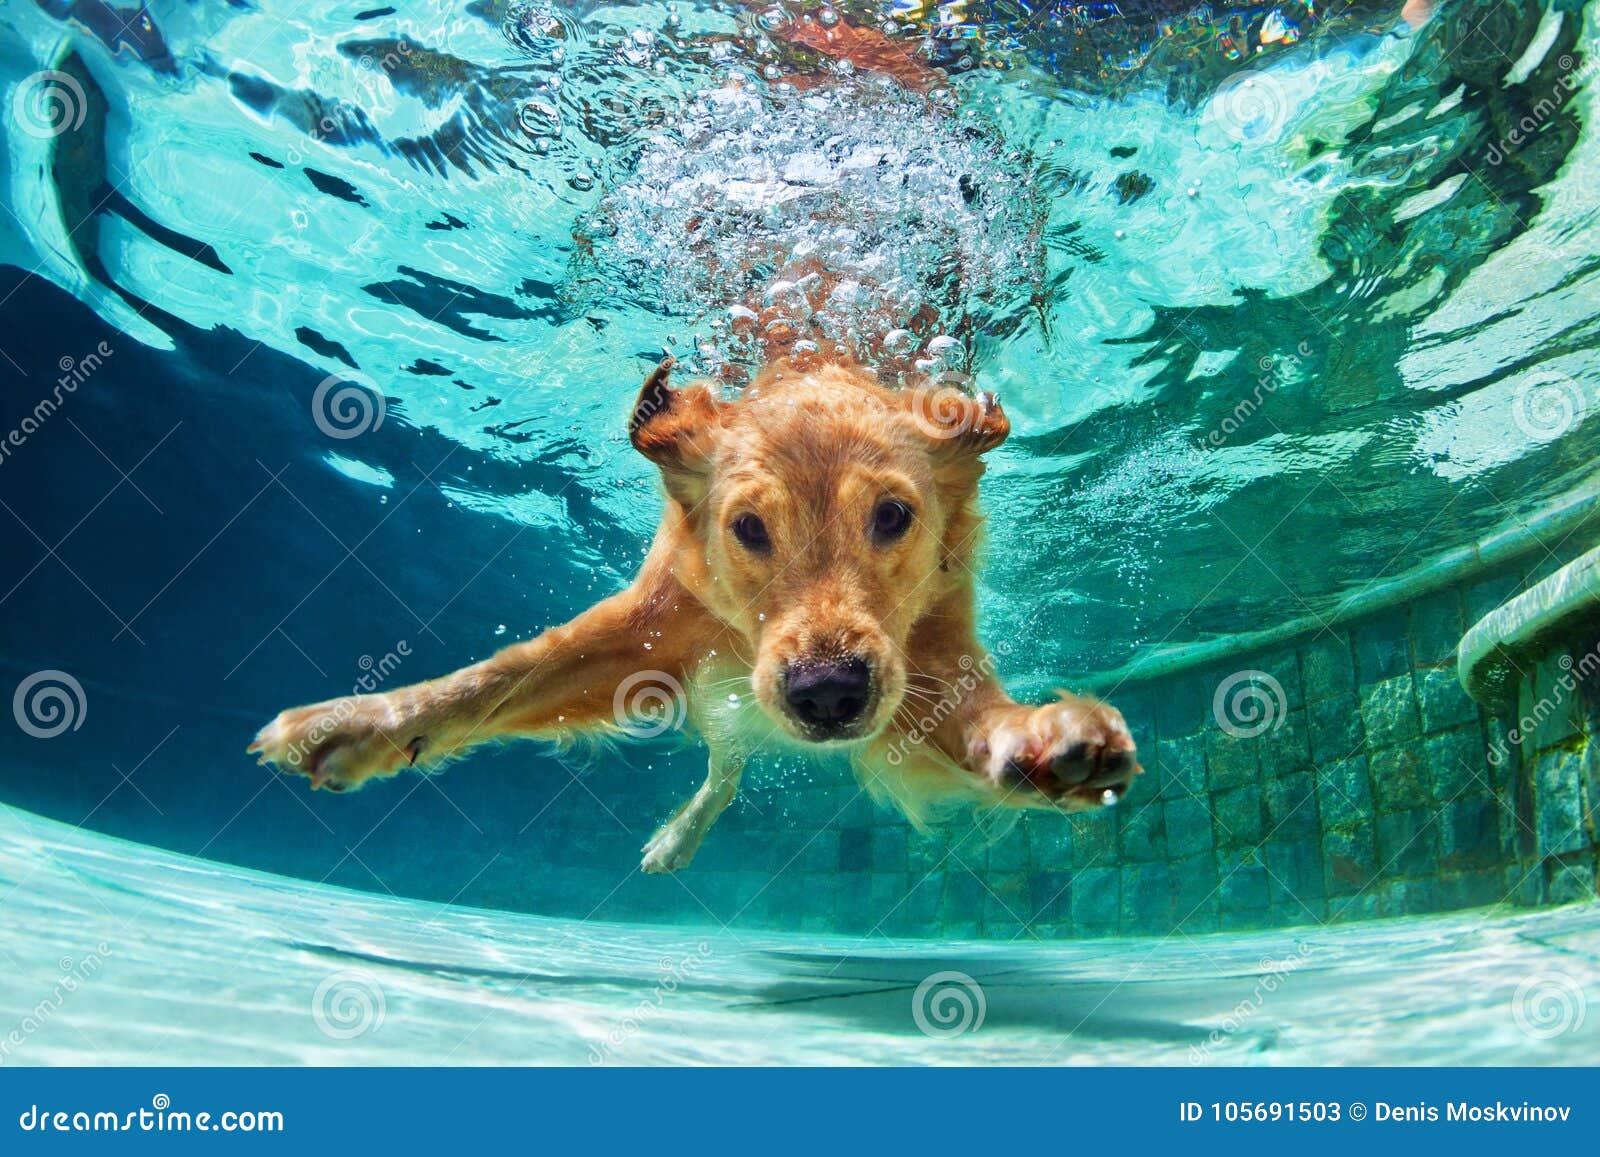 dog diving underwater in swimming pool.